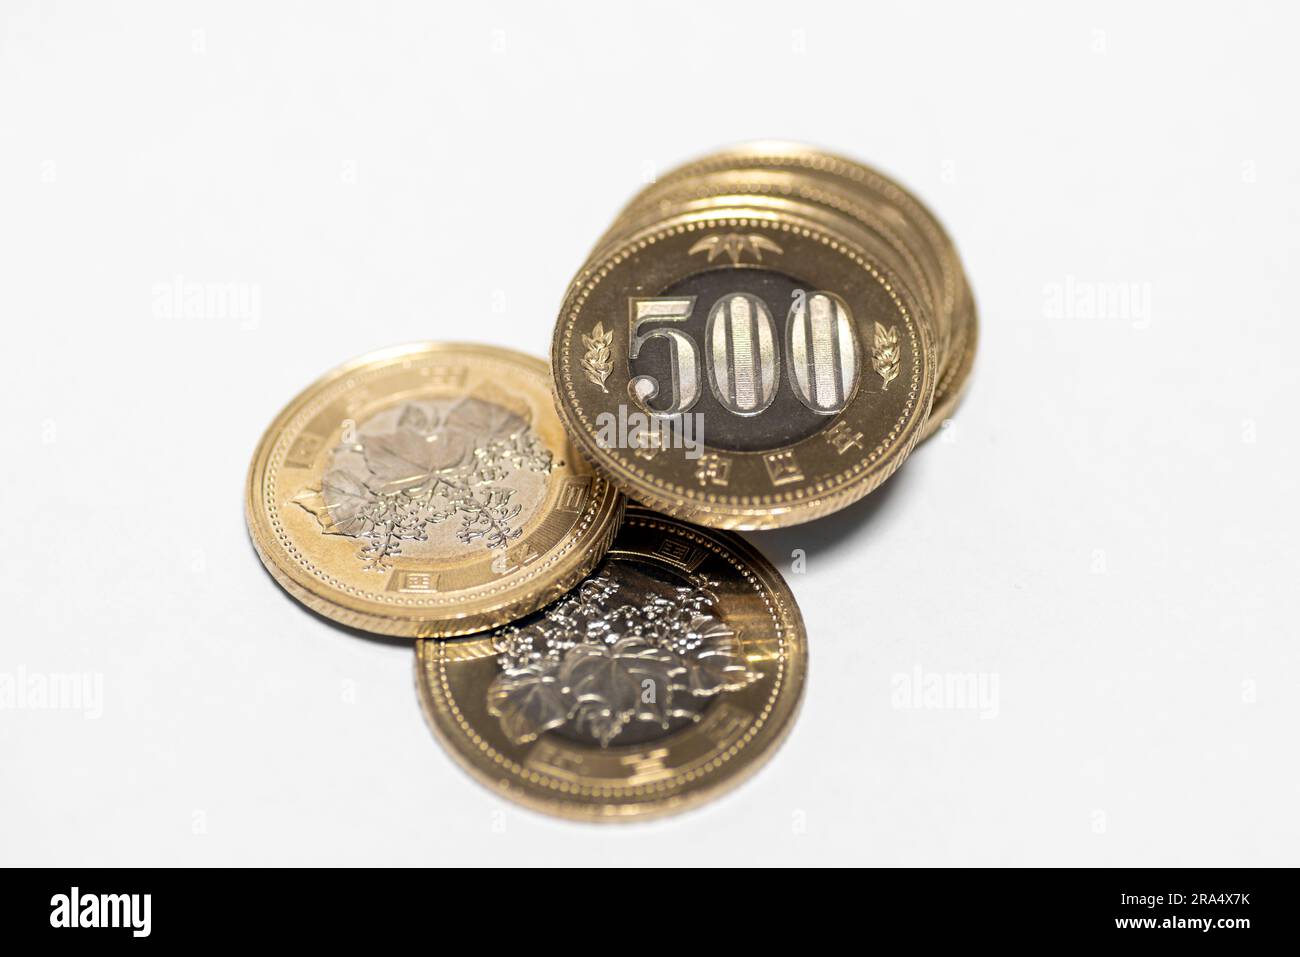 New 500 yen coins of Japan Stock Photo